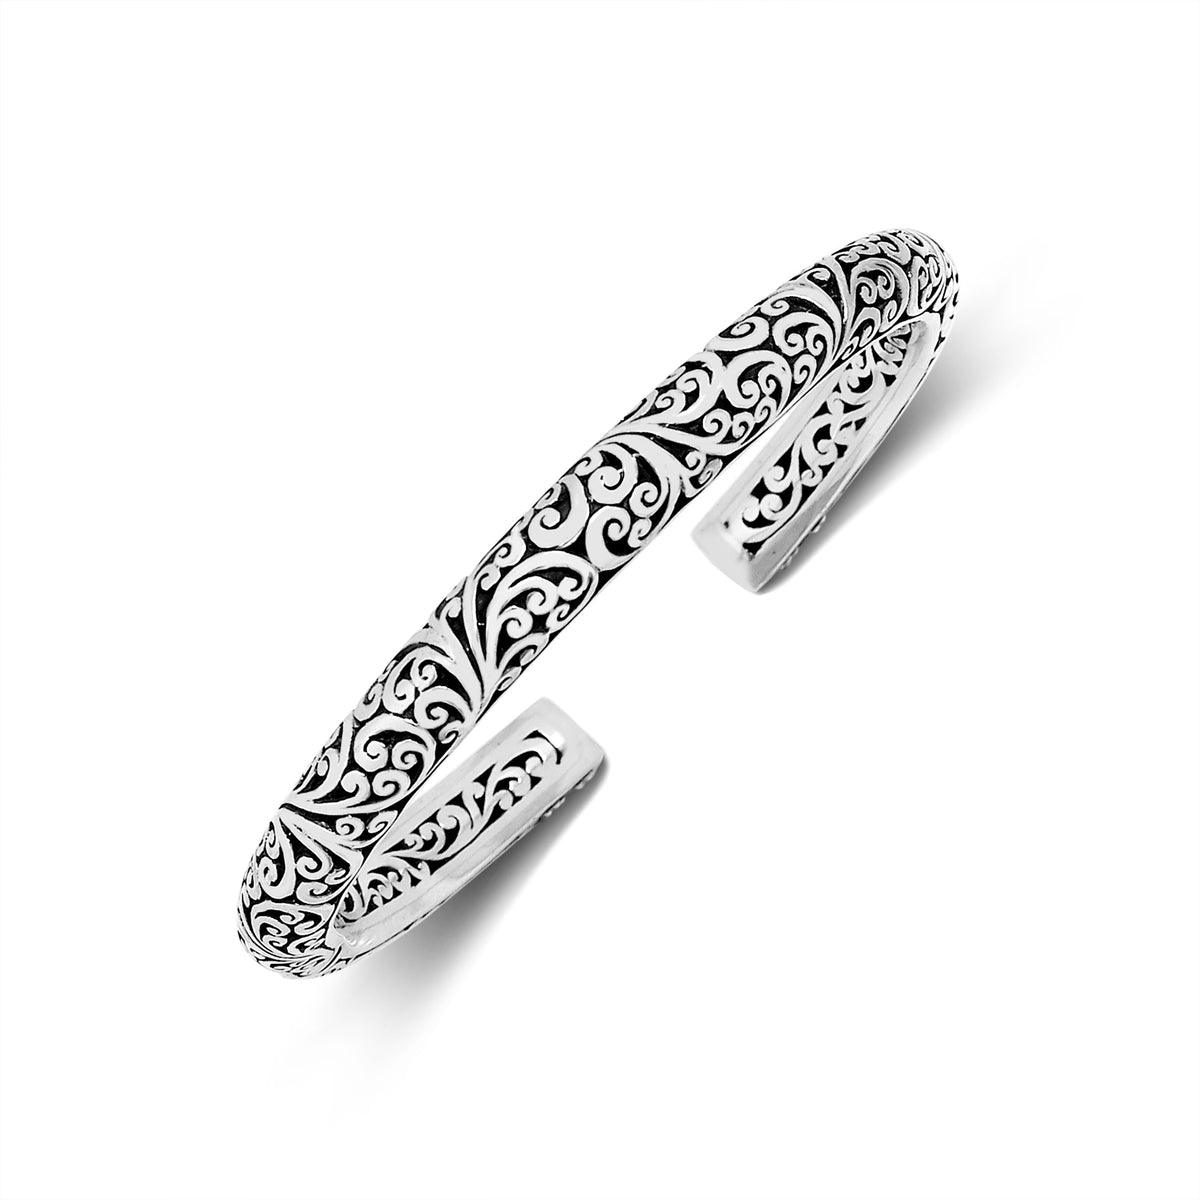 LH Classic Intricate Hand Carved and Granulated Ends Cuff